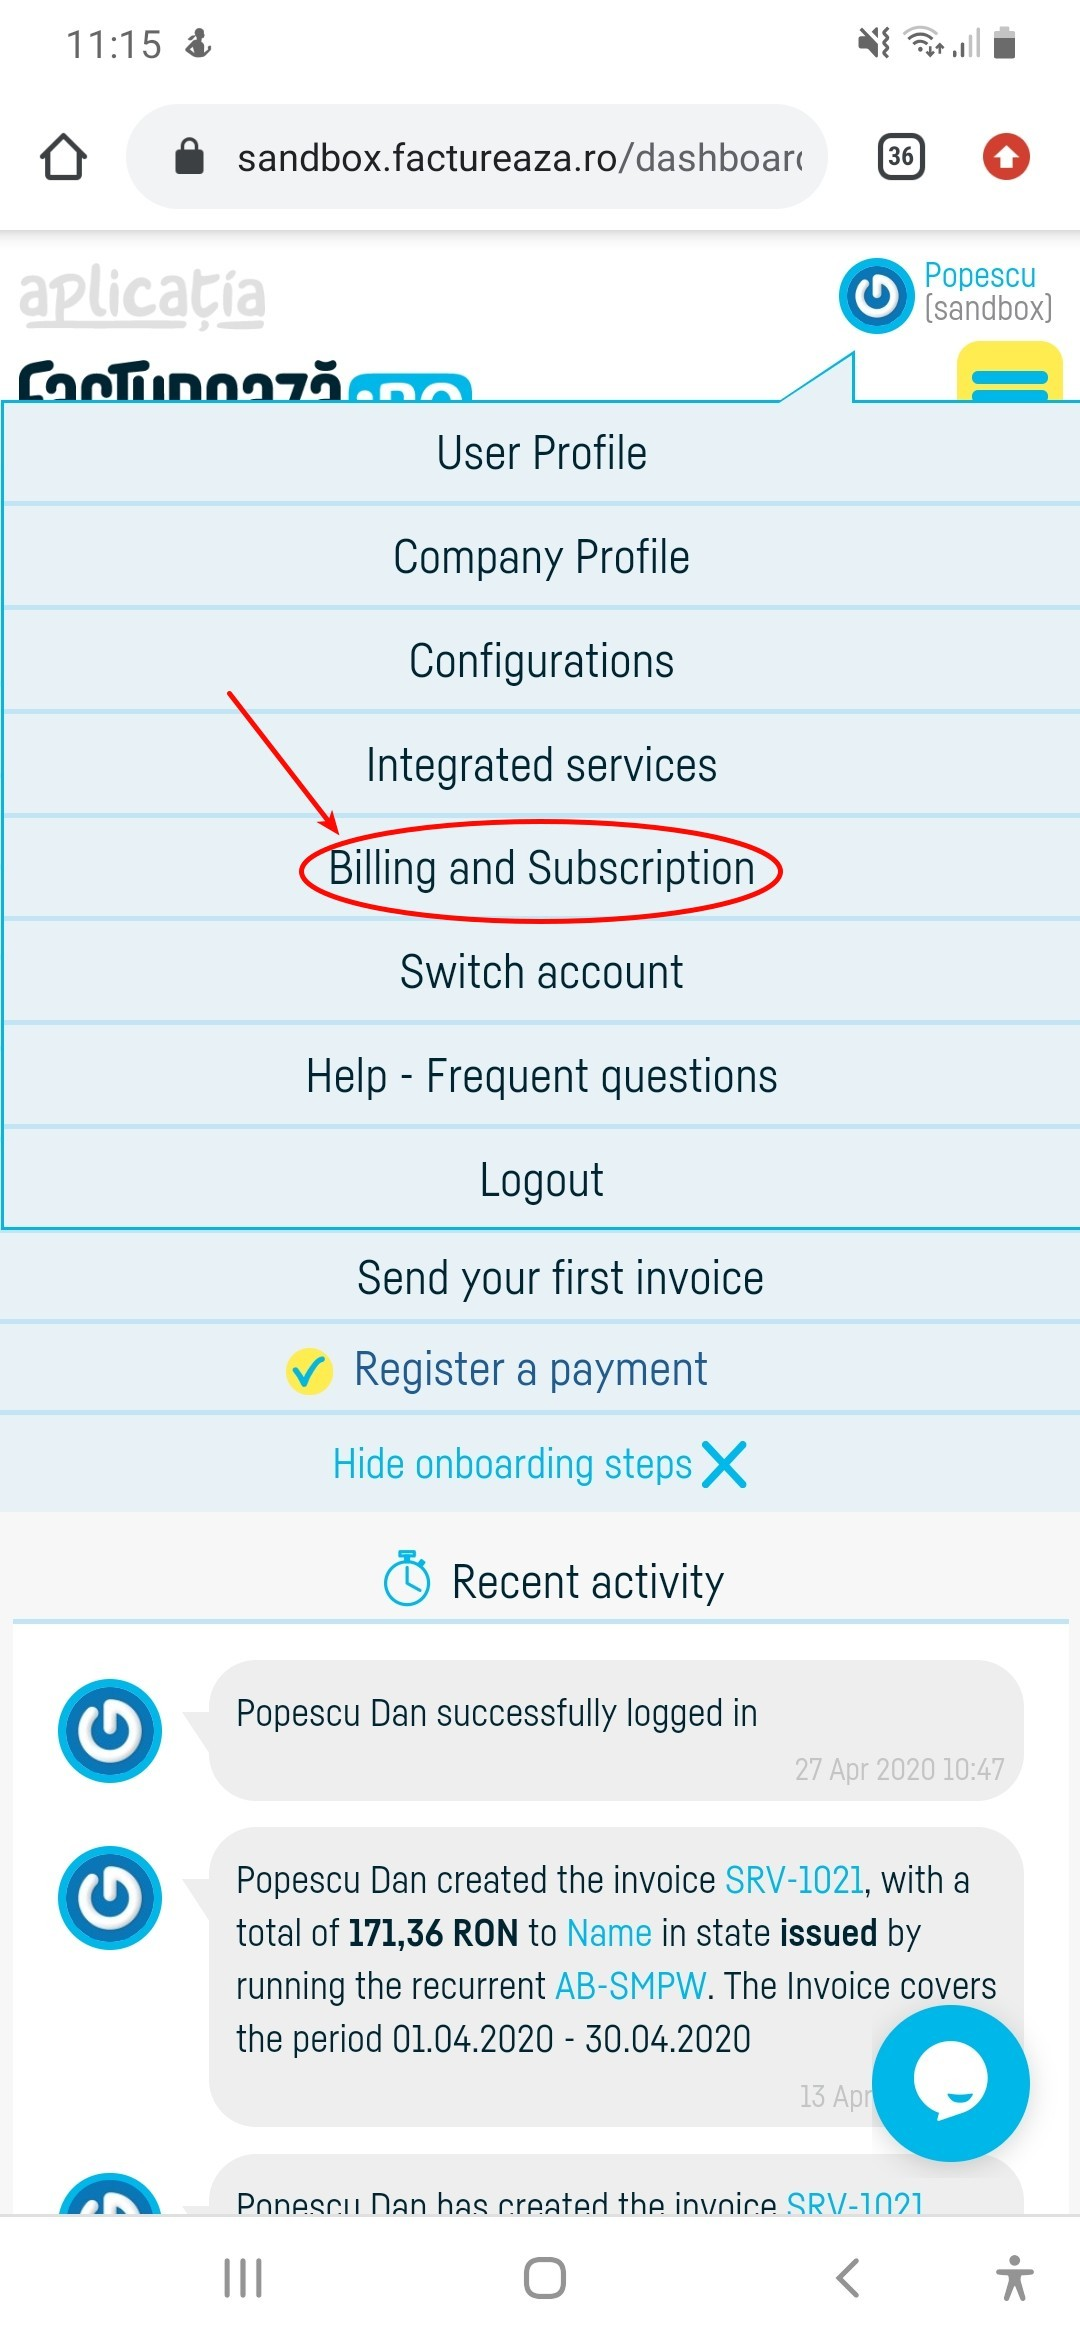 How do I switch to a free subscription? - pasul 2